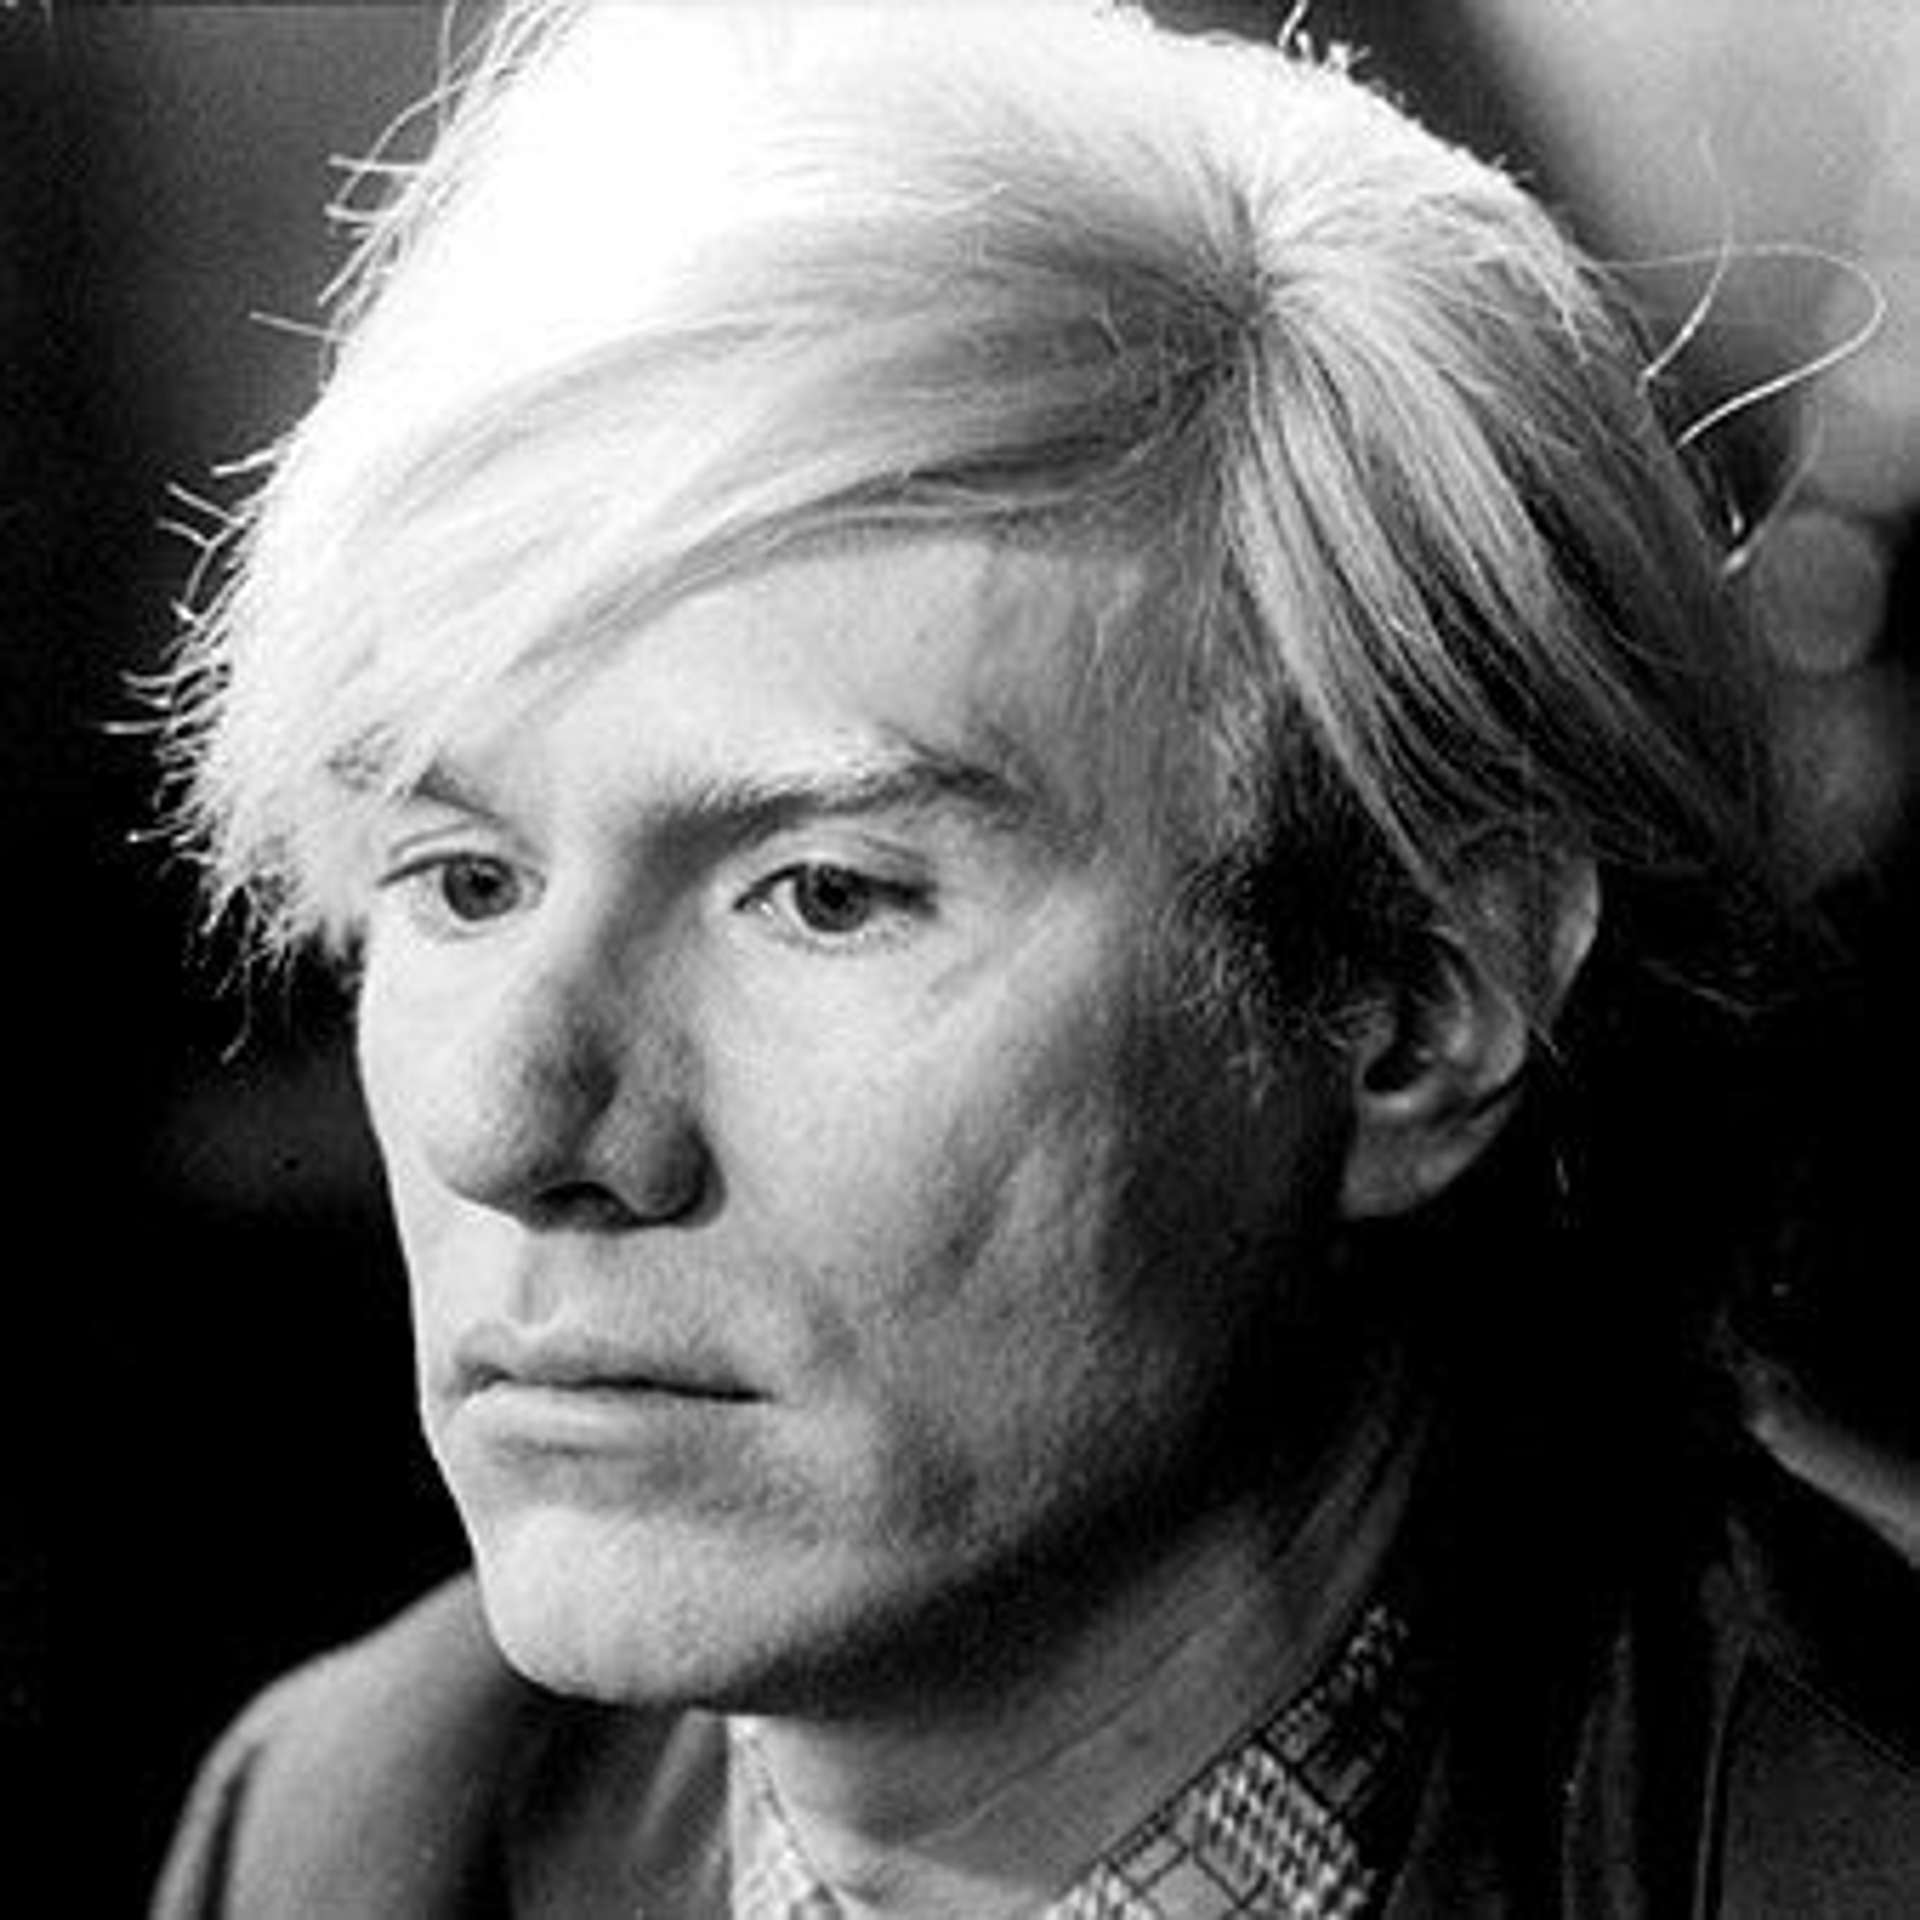 Market Watch Andy Warhol: Top 10 Most Investable Prints